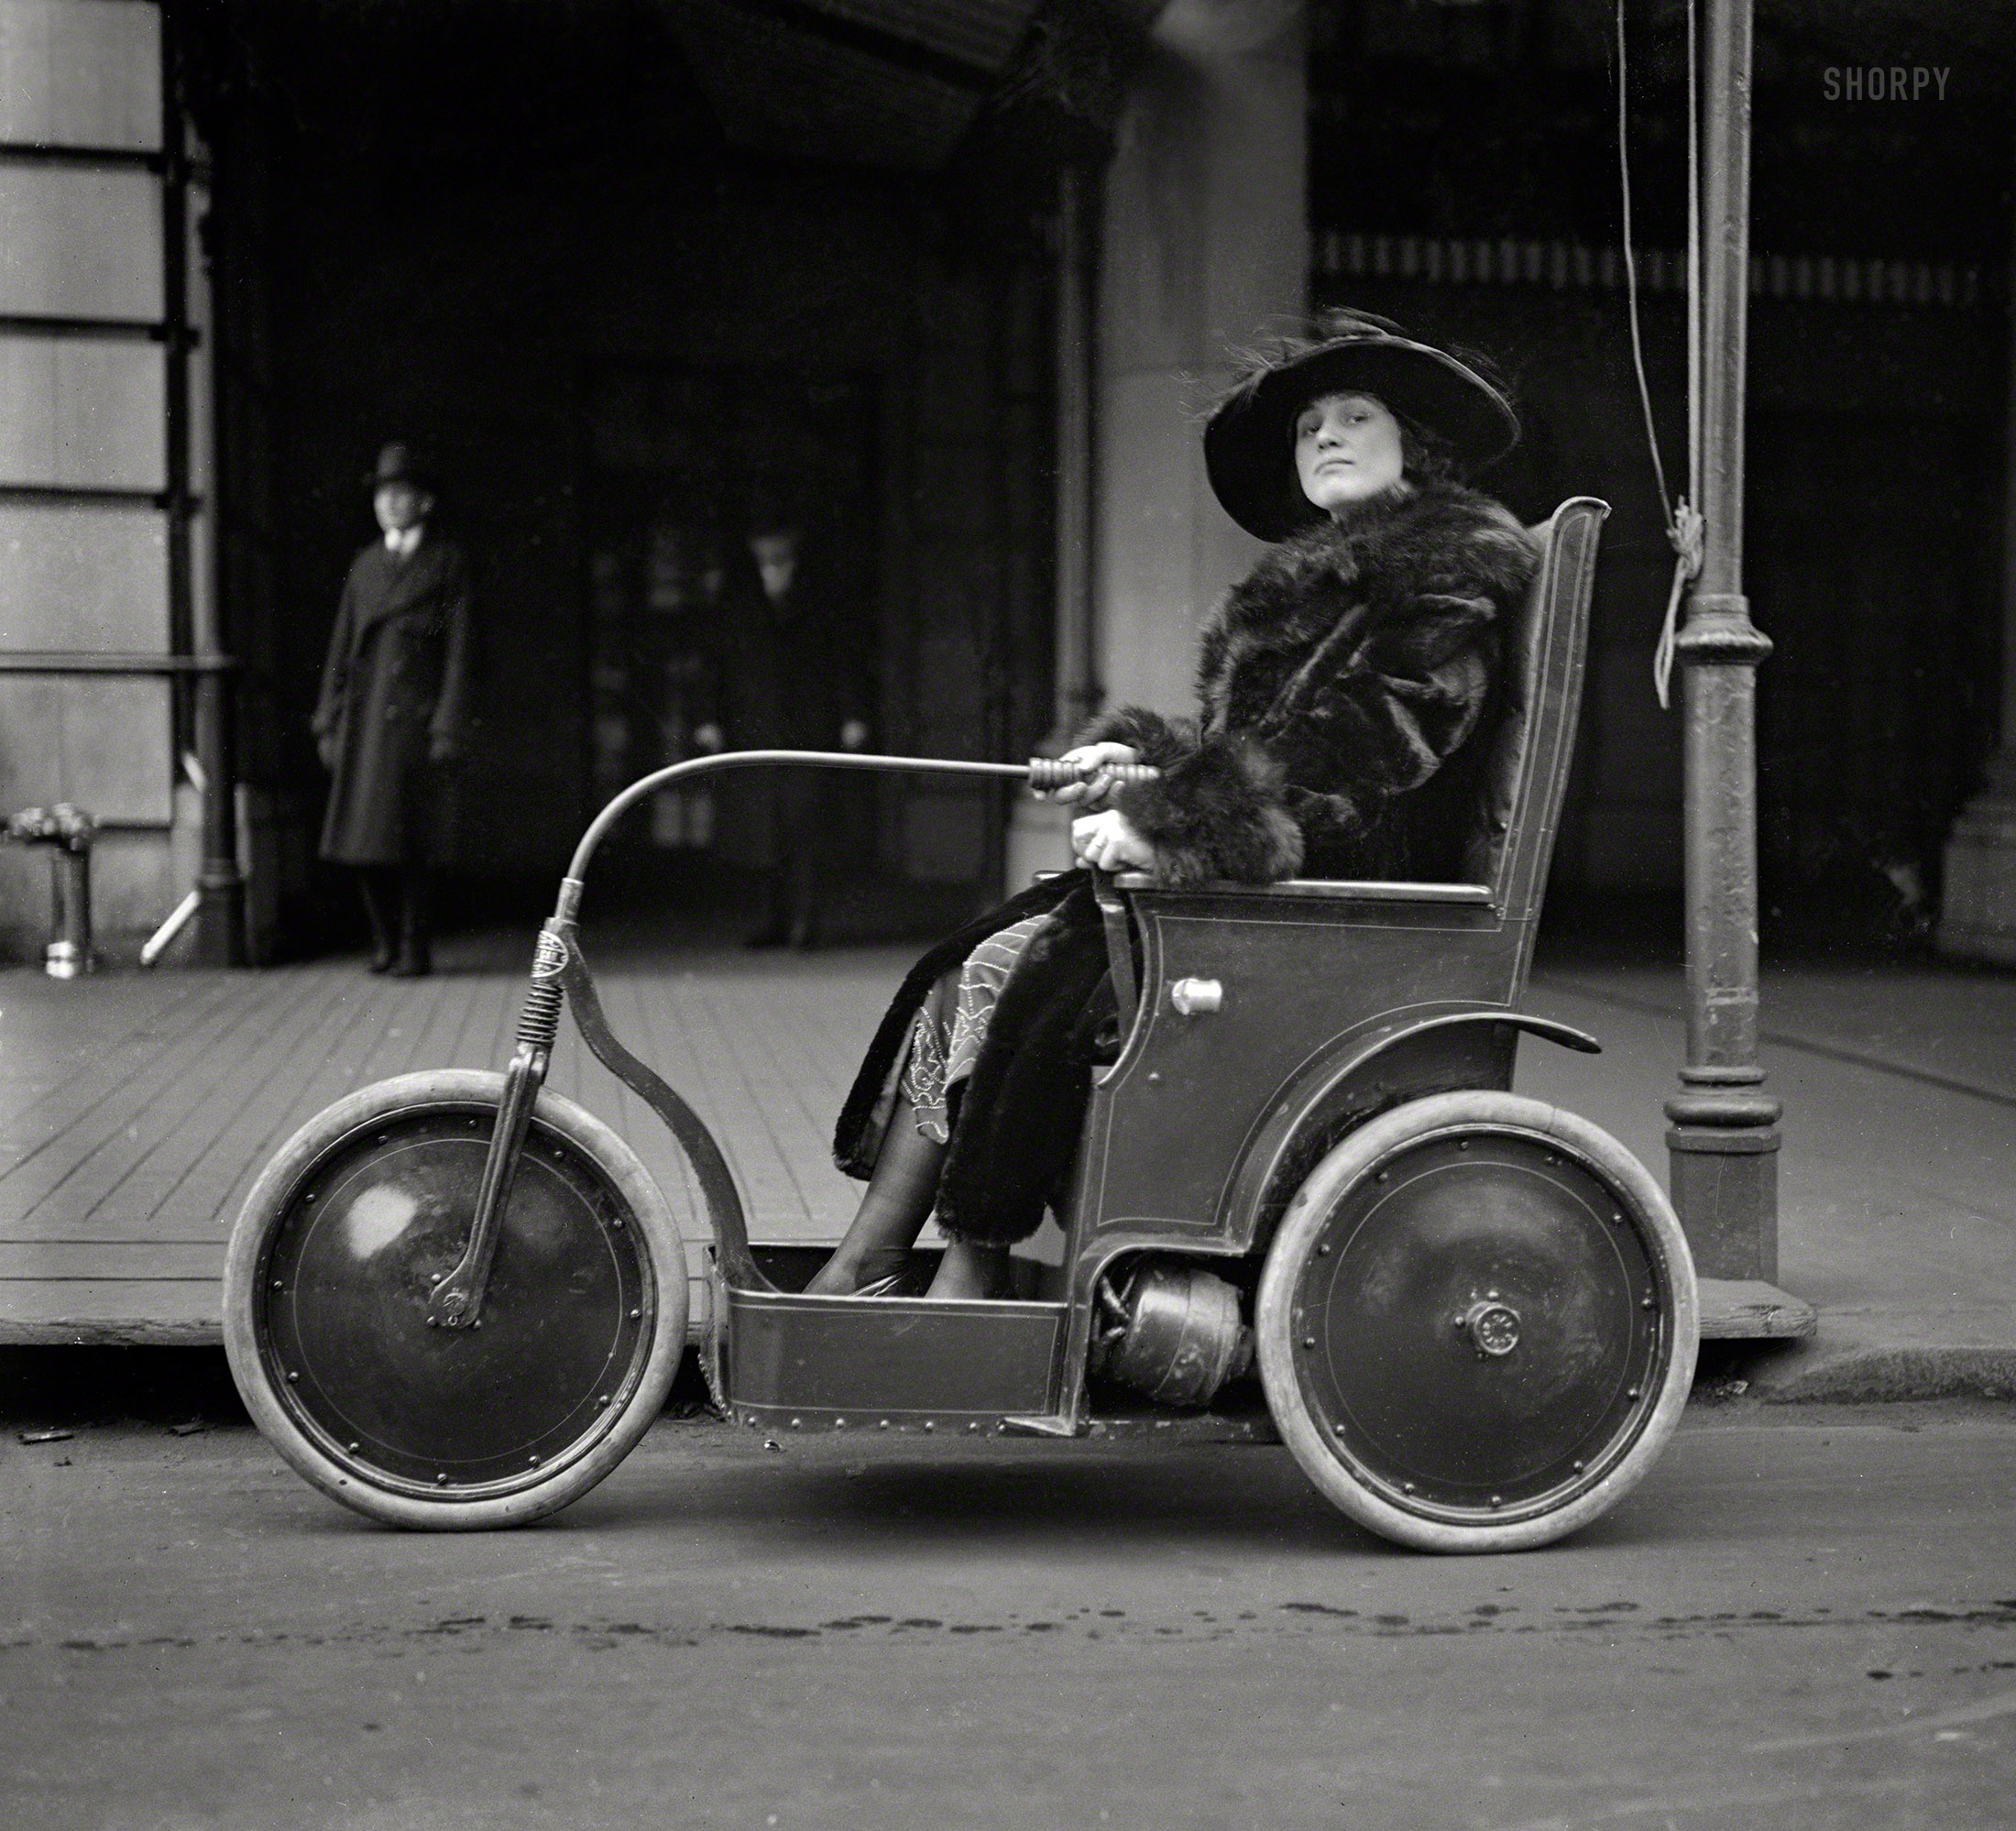 &nbsp; &nbsp; &nbsp; &nbsp; UPDATE: A Washington Post news item identifies this as a Custer "Cootie Car."
Jan. 22, 1922. Washington, D.C. "Woman in three-wheeled vehicle." The electric chair last spied here. Harris & Ewing glass negative. View full size.